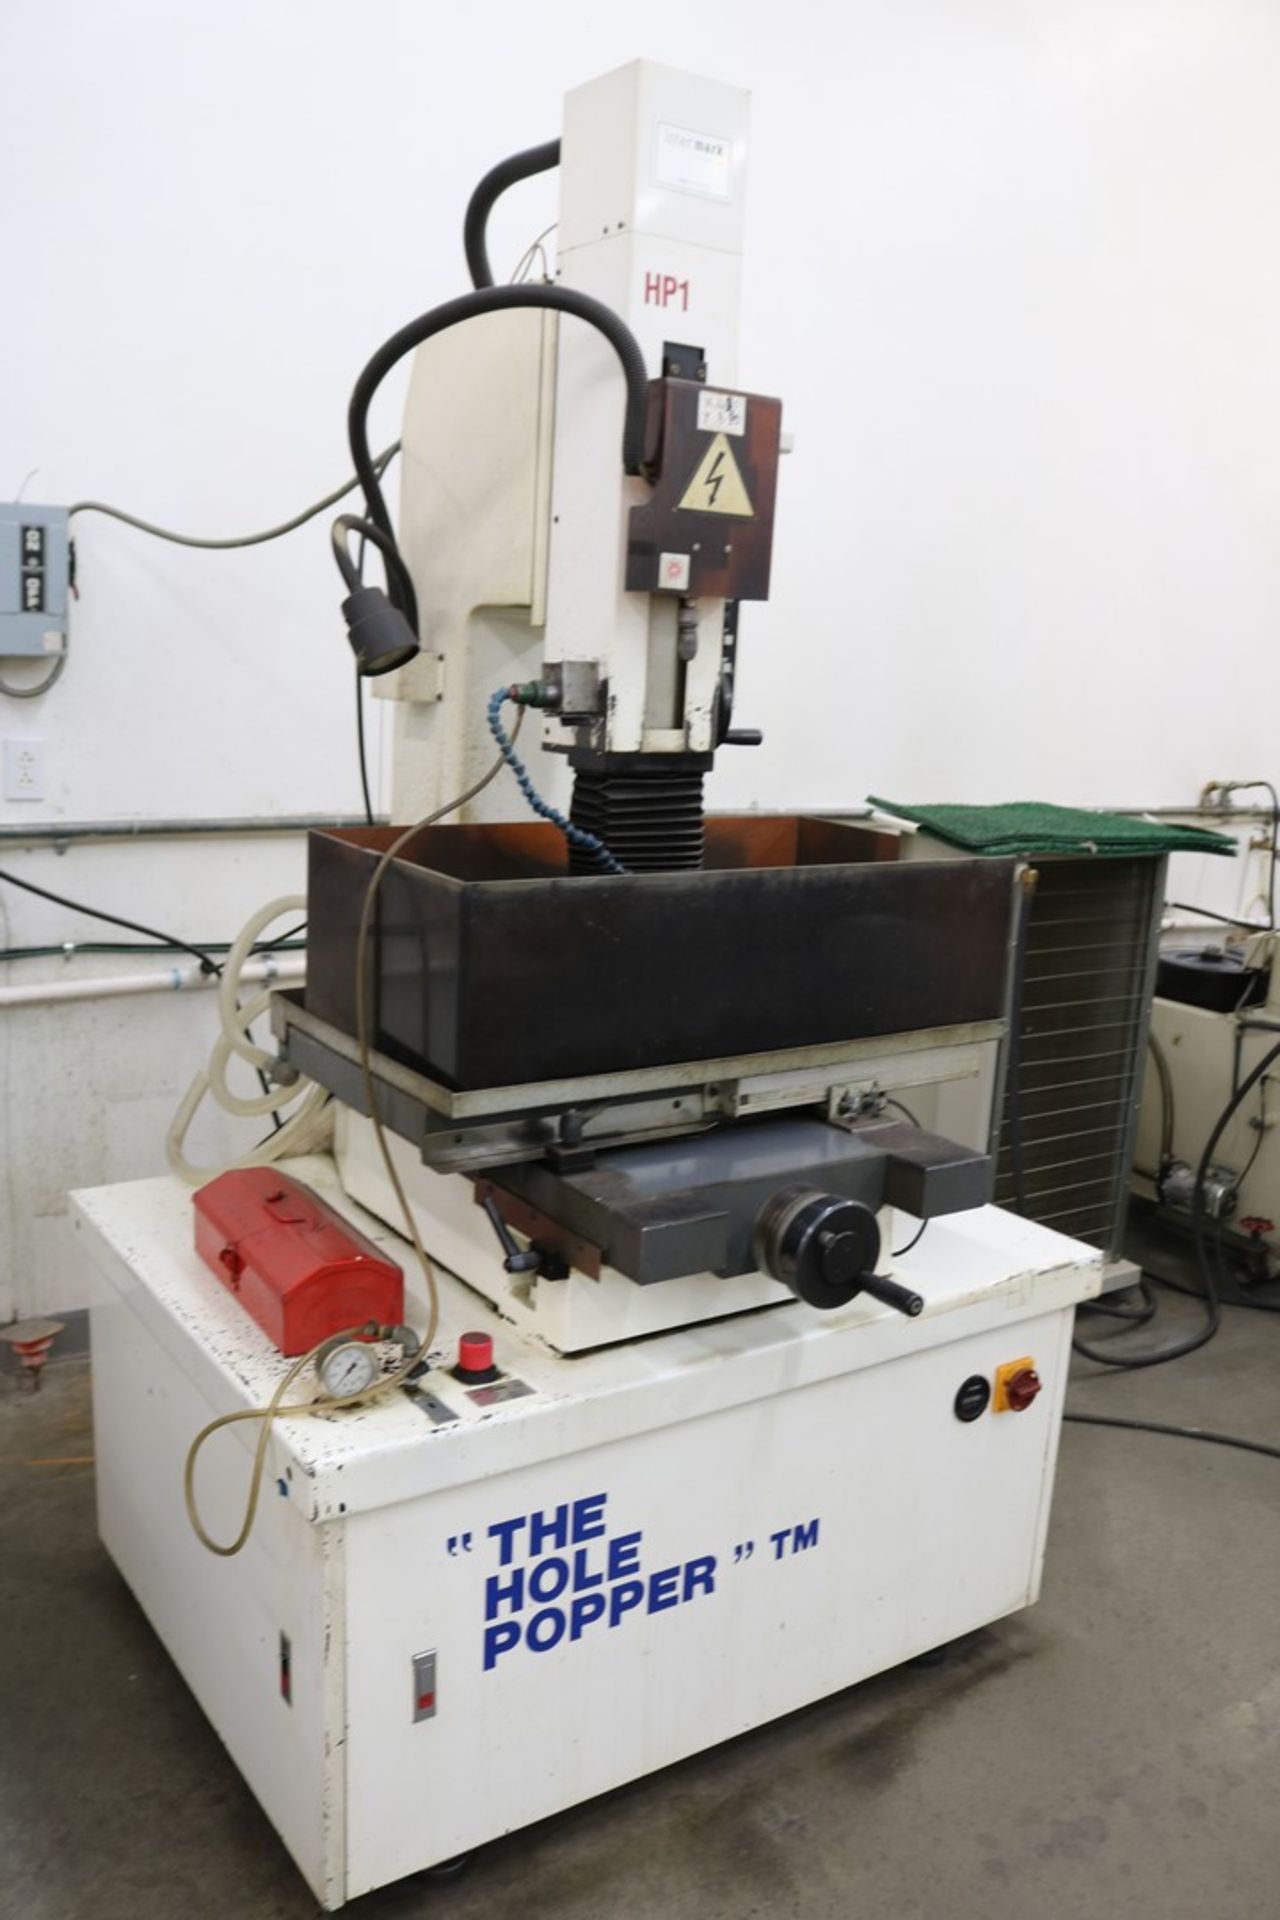 1995 InterMark CM-800 Wire EDM "The Hole Popper" with Heidehain Control ( Needs a replacement